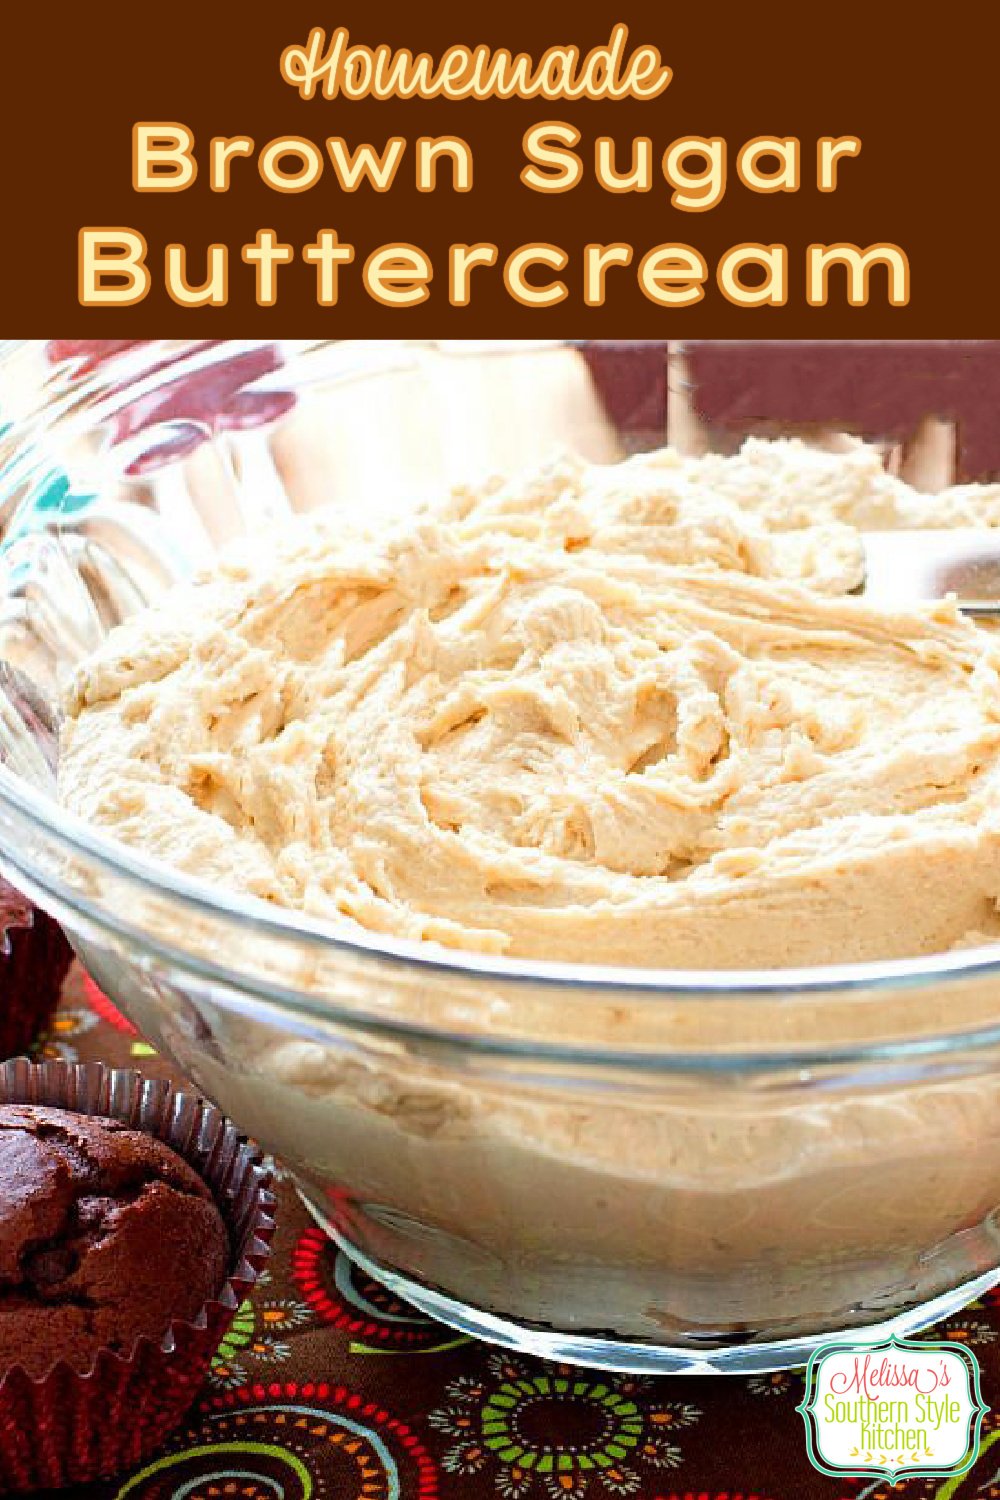 You'll elevate your cake frostings with this rich and buttery homemade Brown Sugar Buttercream for slathering on cakes, cupcakes and muffins. #brownsugarfrosting #brownsugarbuttercream #buttercreamrecipes #cakefrosting #icingrecipes #desserts #southernrecipes